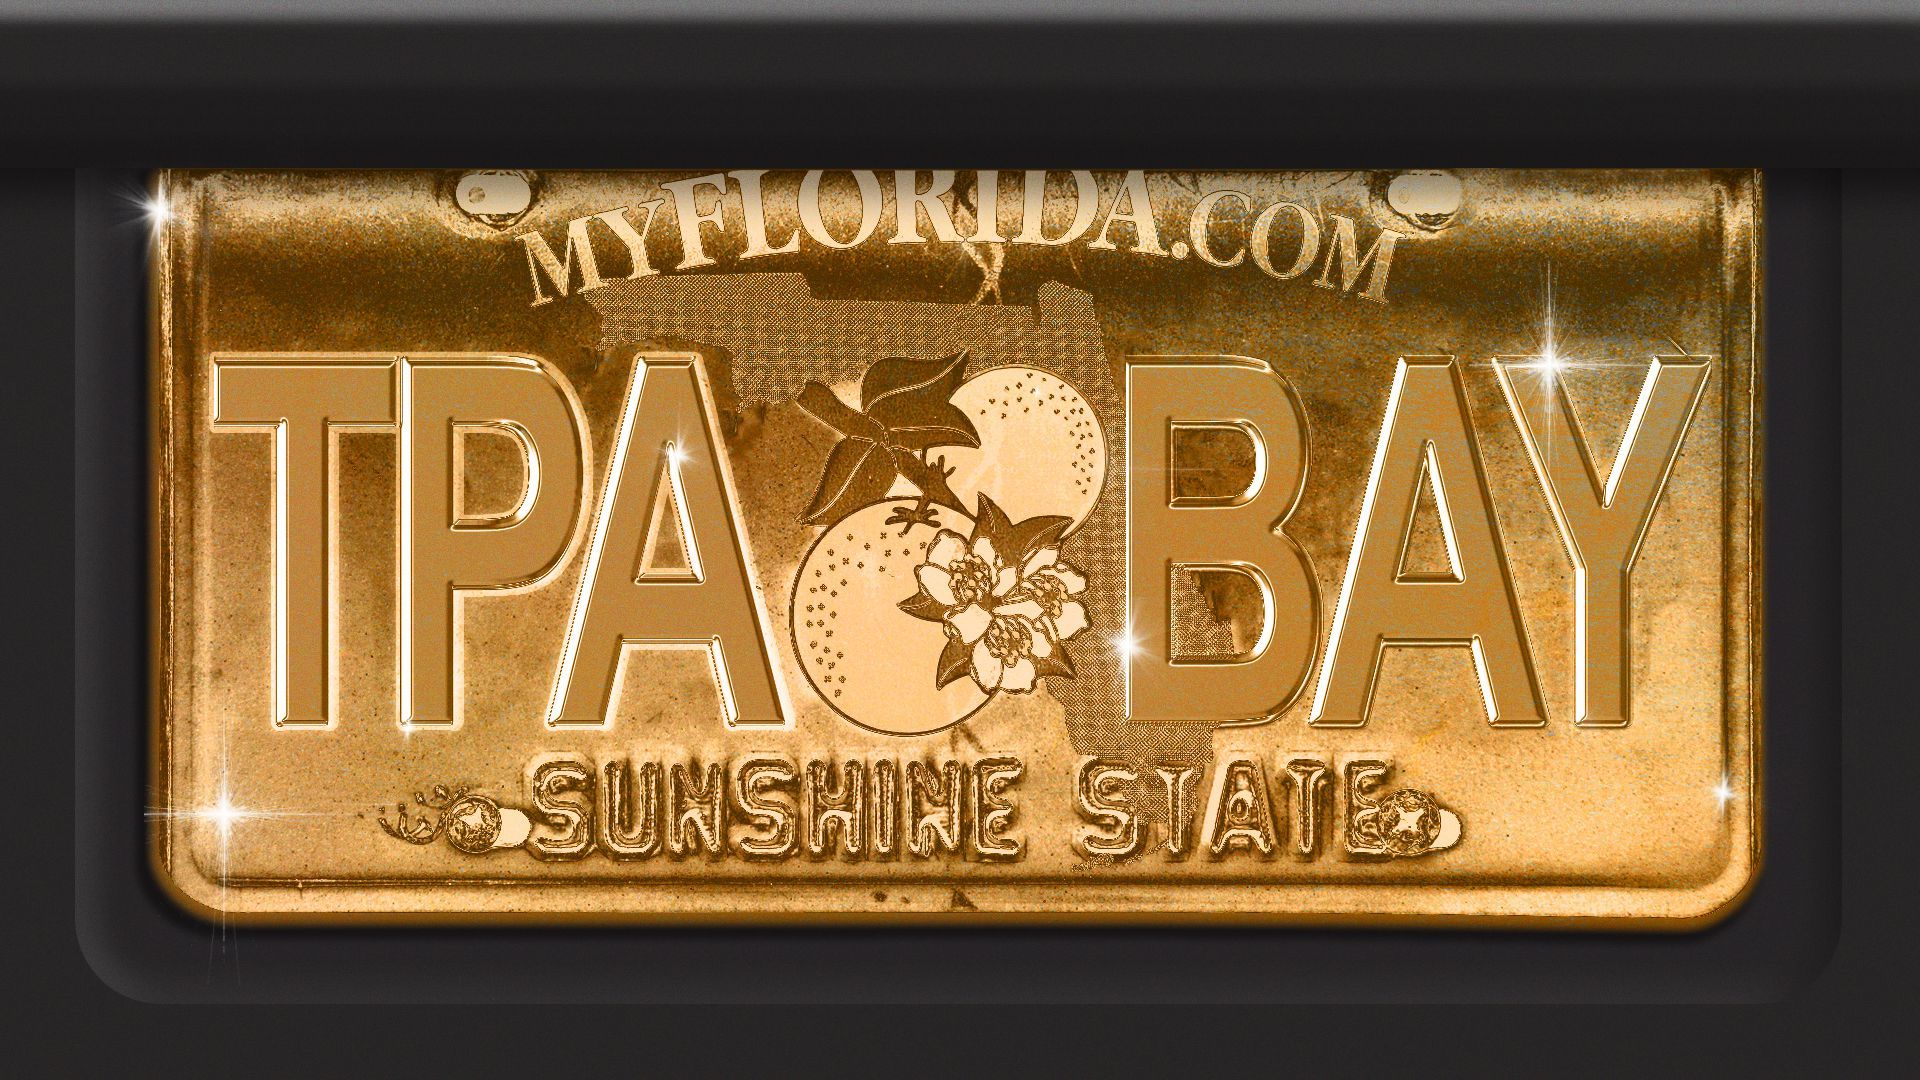 Illustration of a Florida license plate made out of gold.